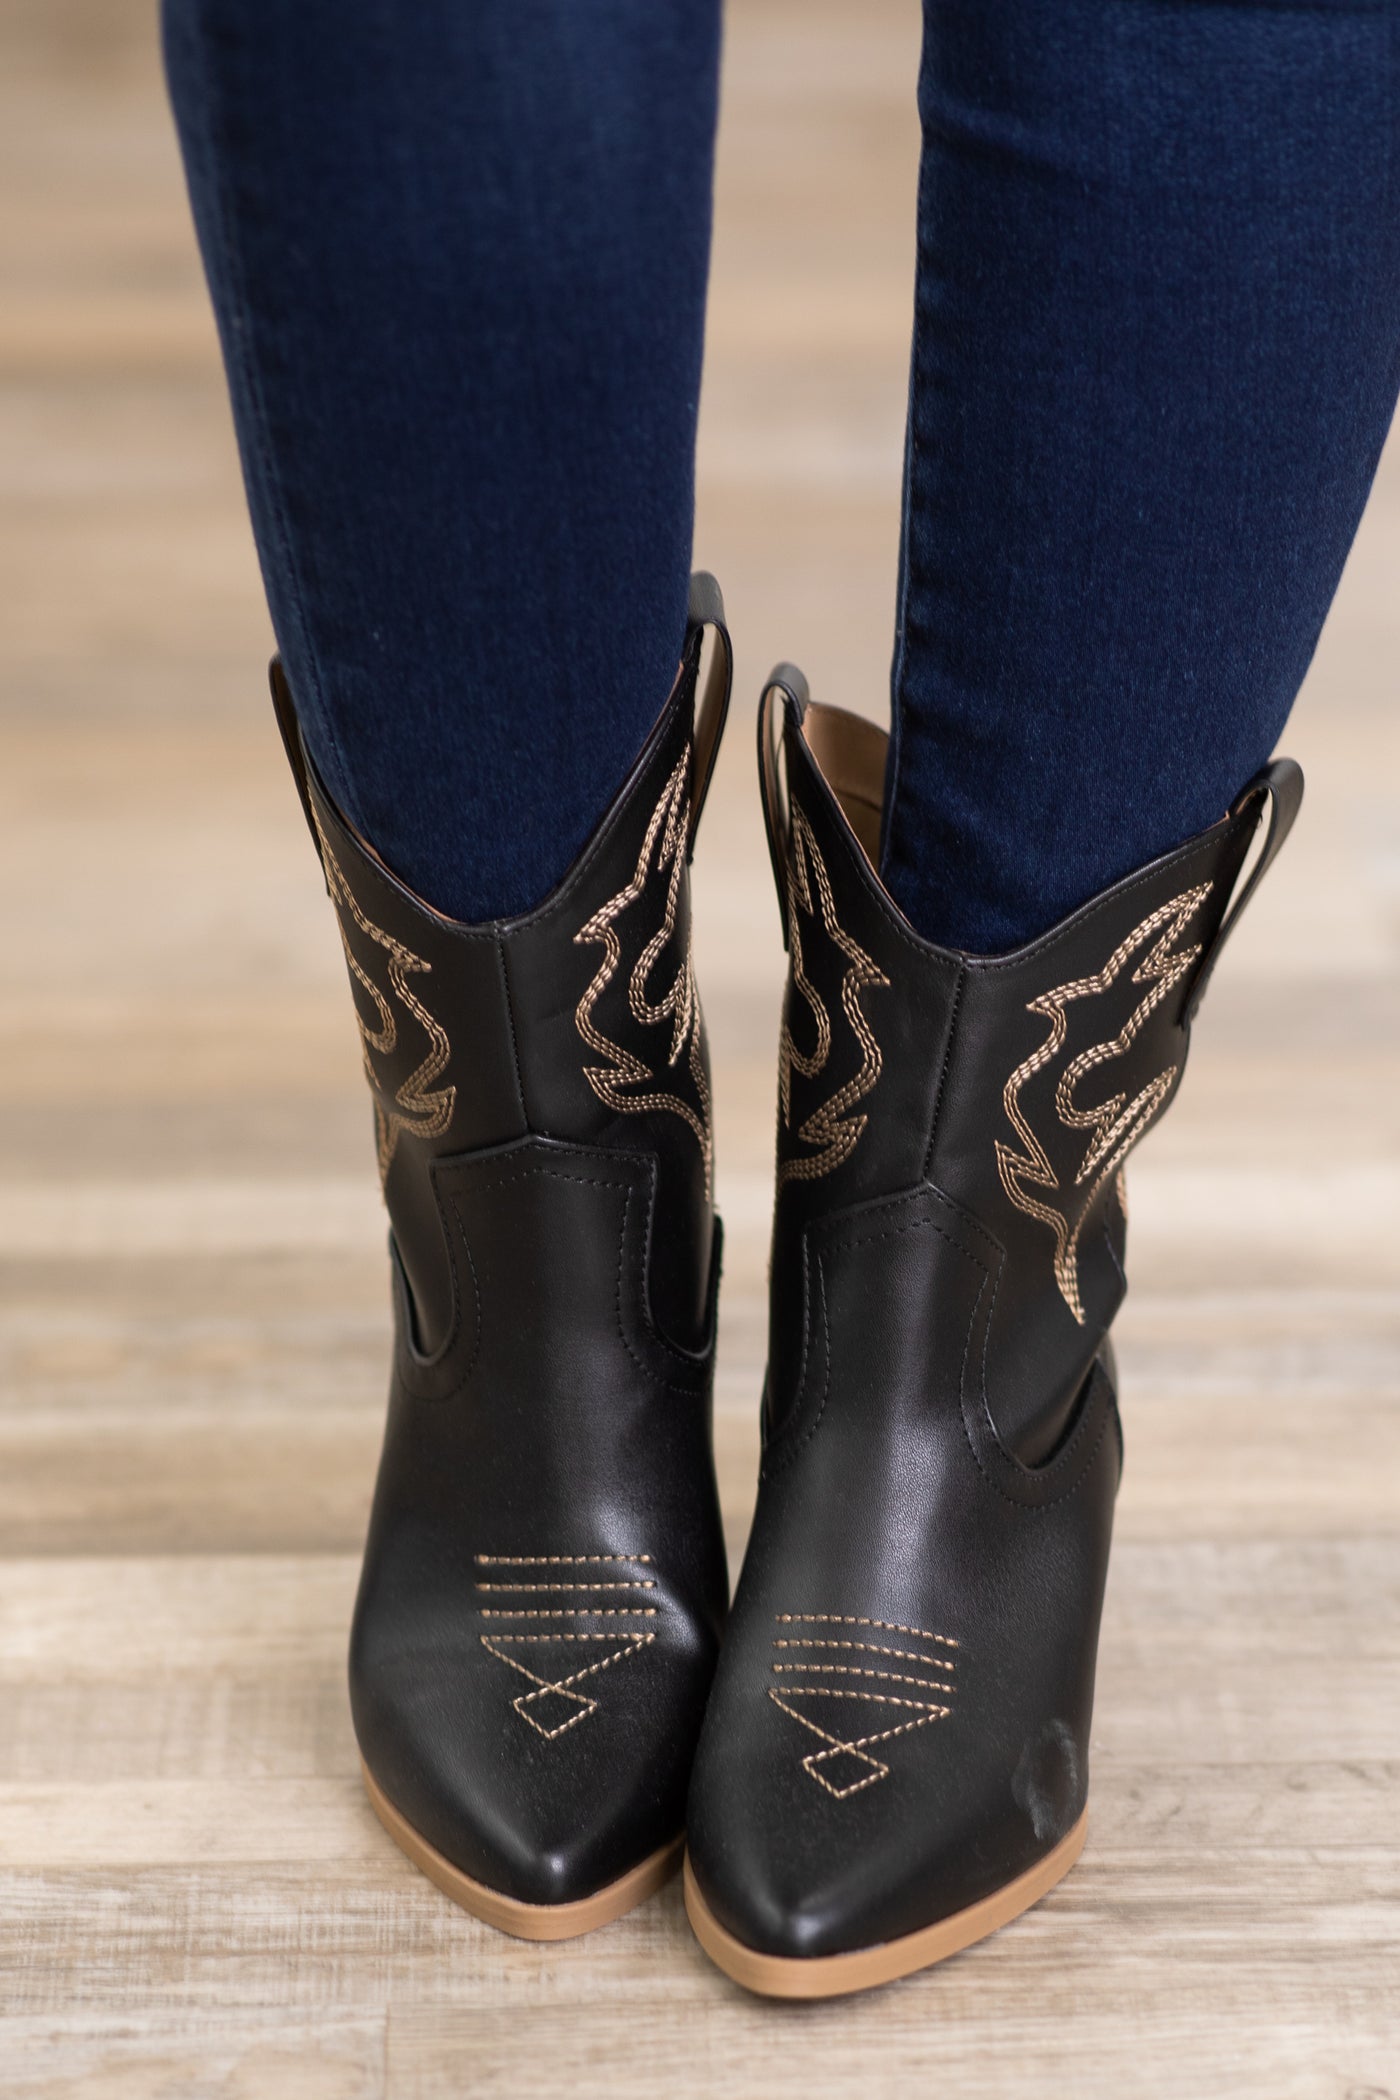 Black and Tan Mid Calf Western Boots